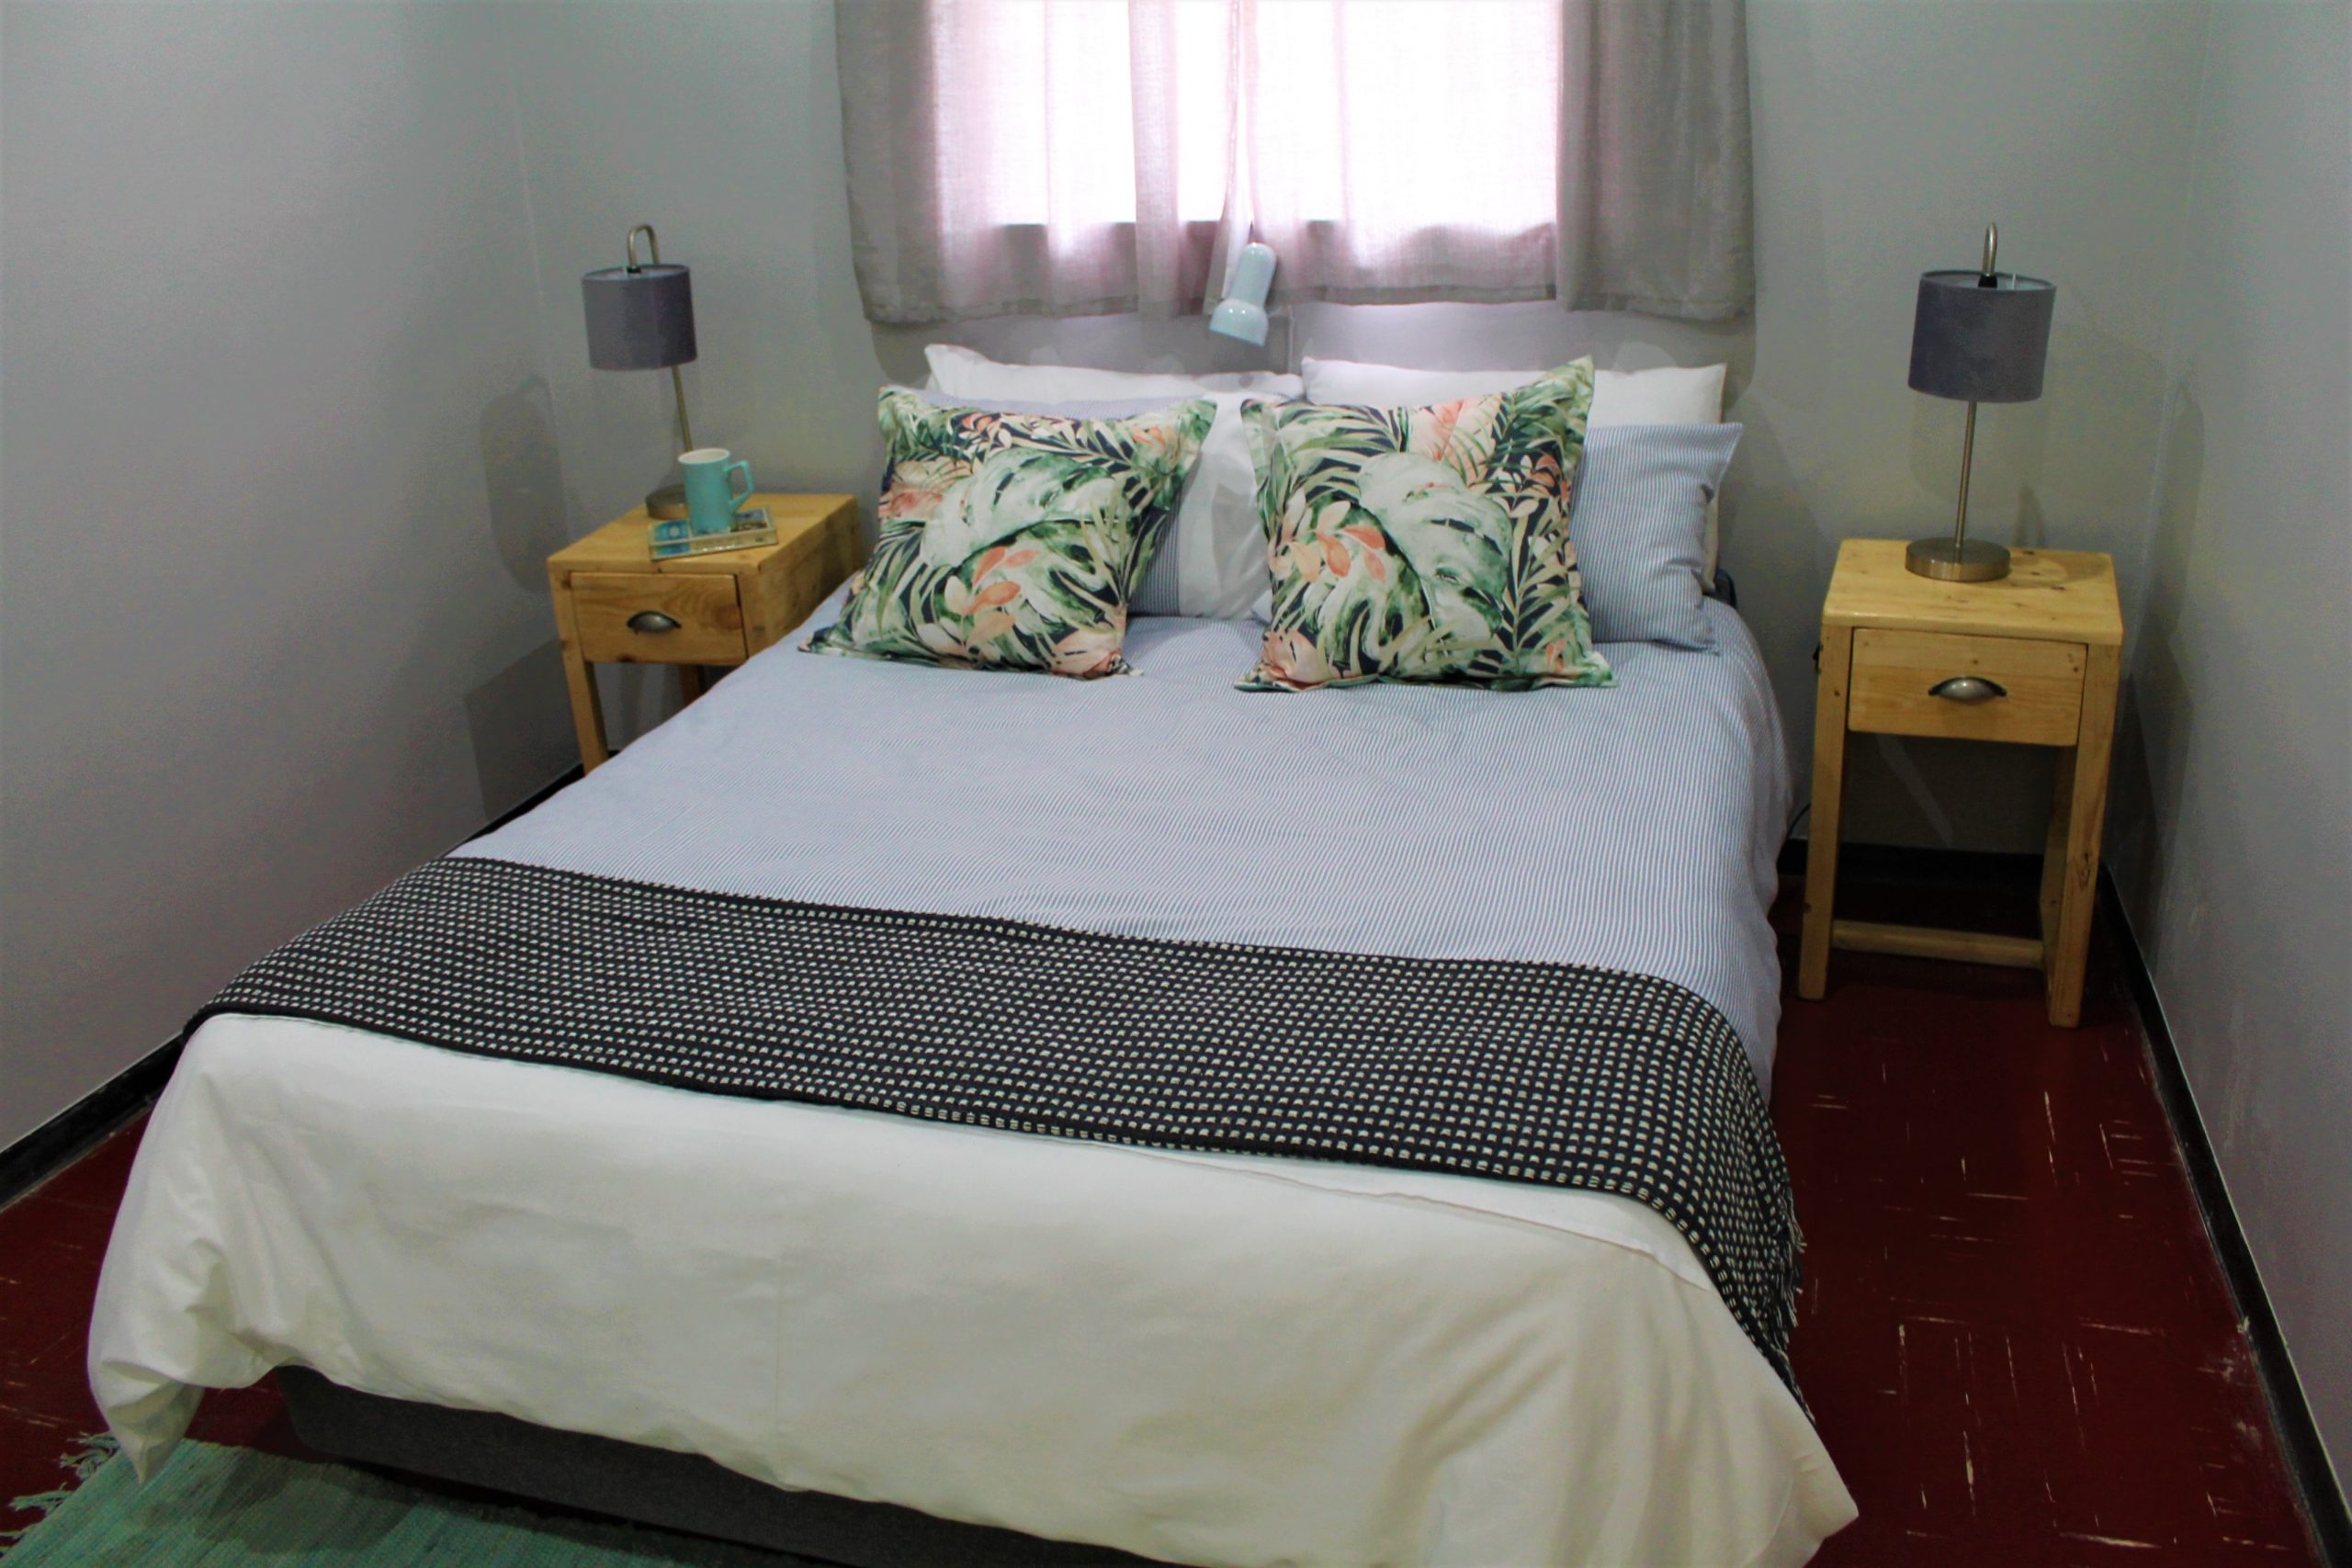 double-bed-accommodation